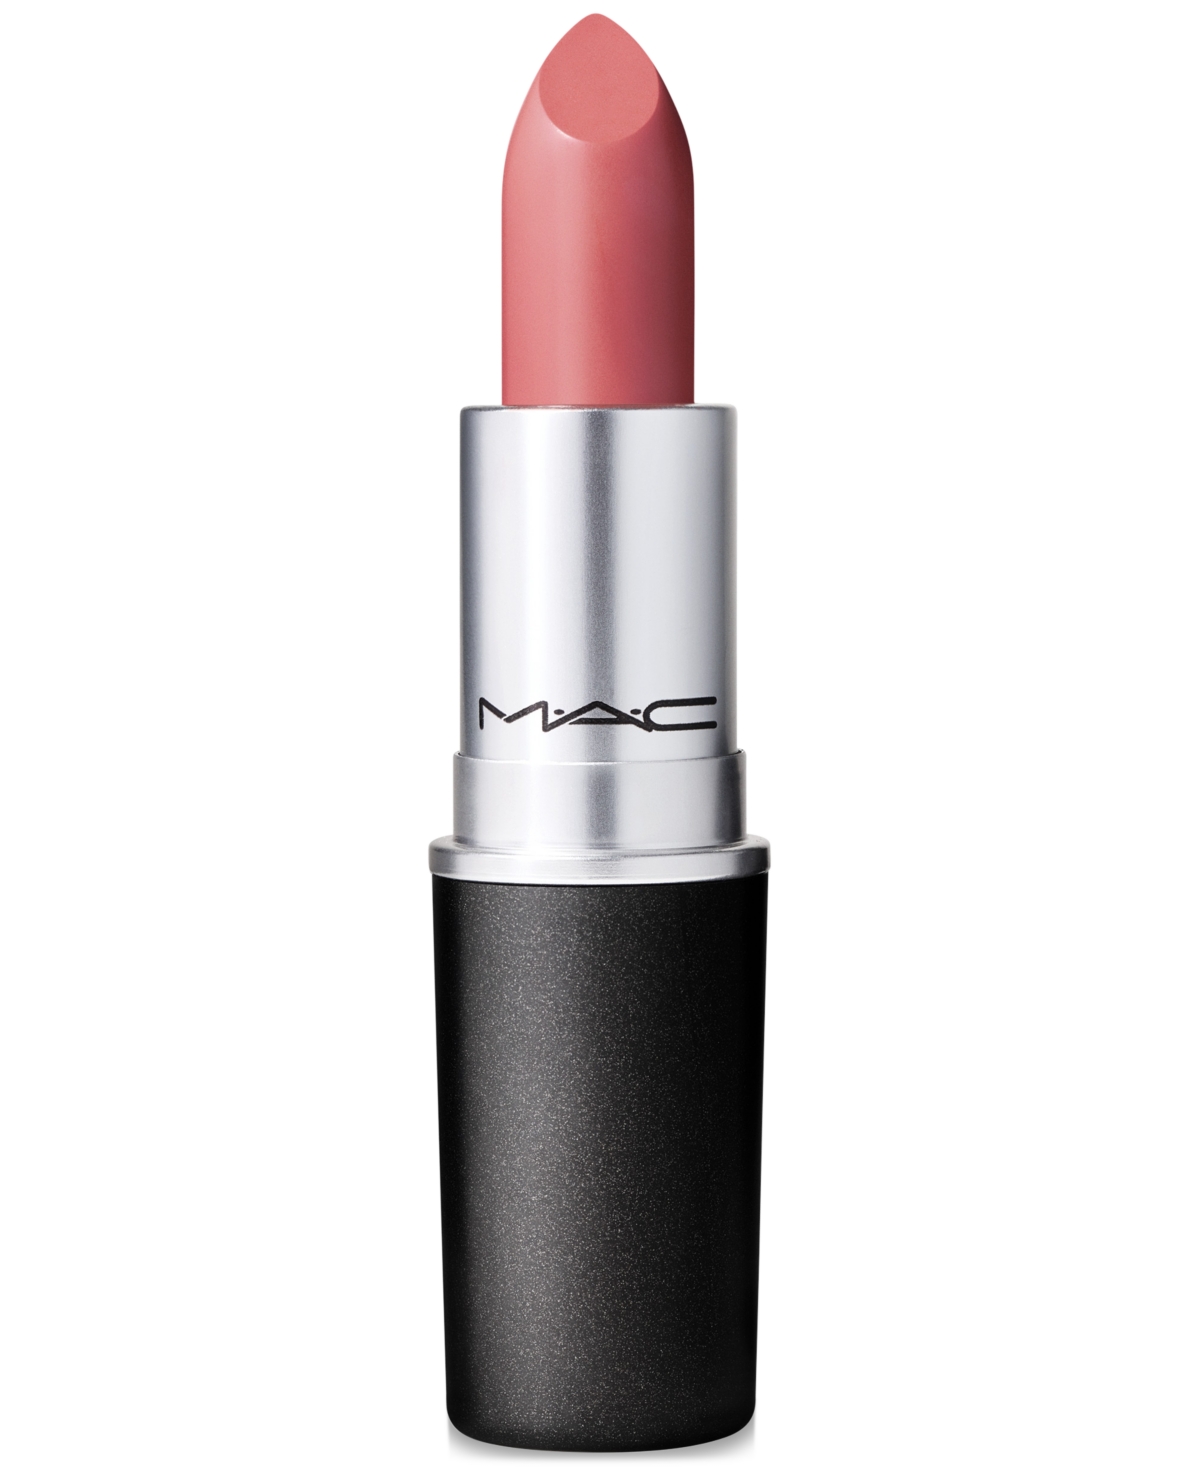 Mac Re-think Pink Matte Lipstick In Come Over (nude Pink)